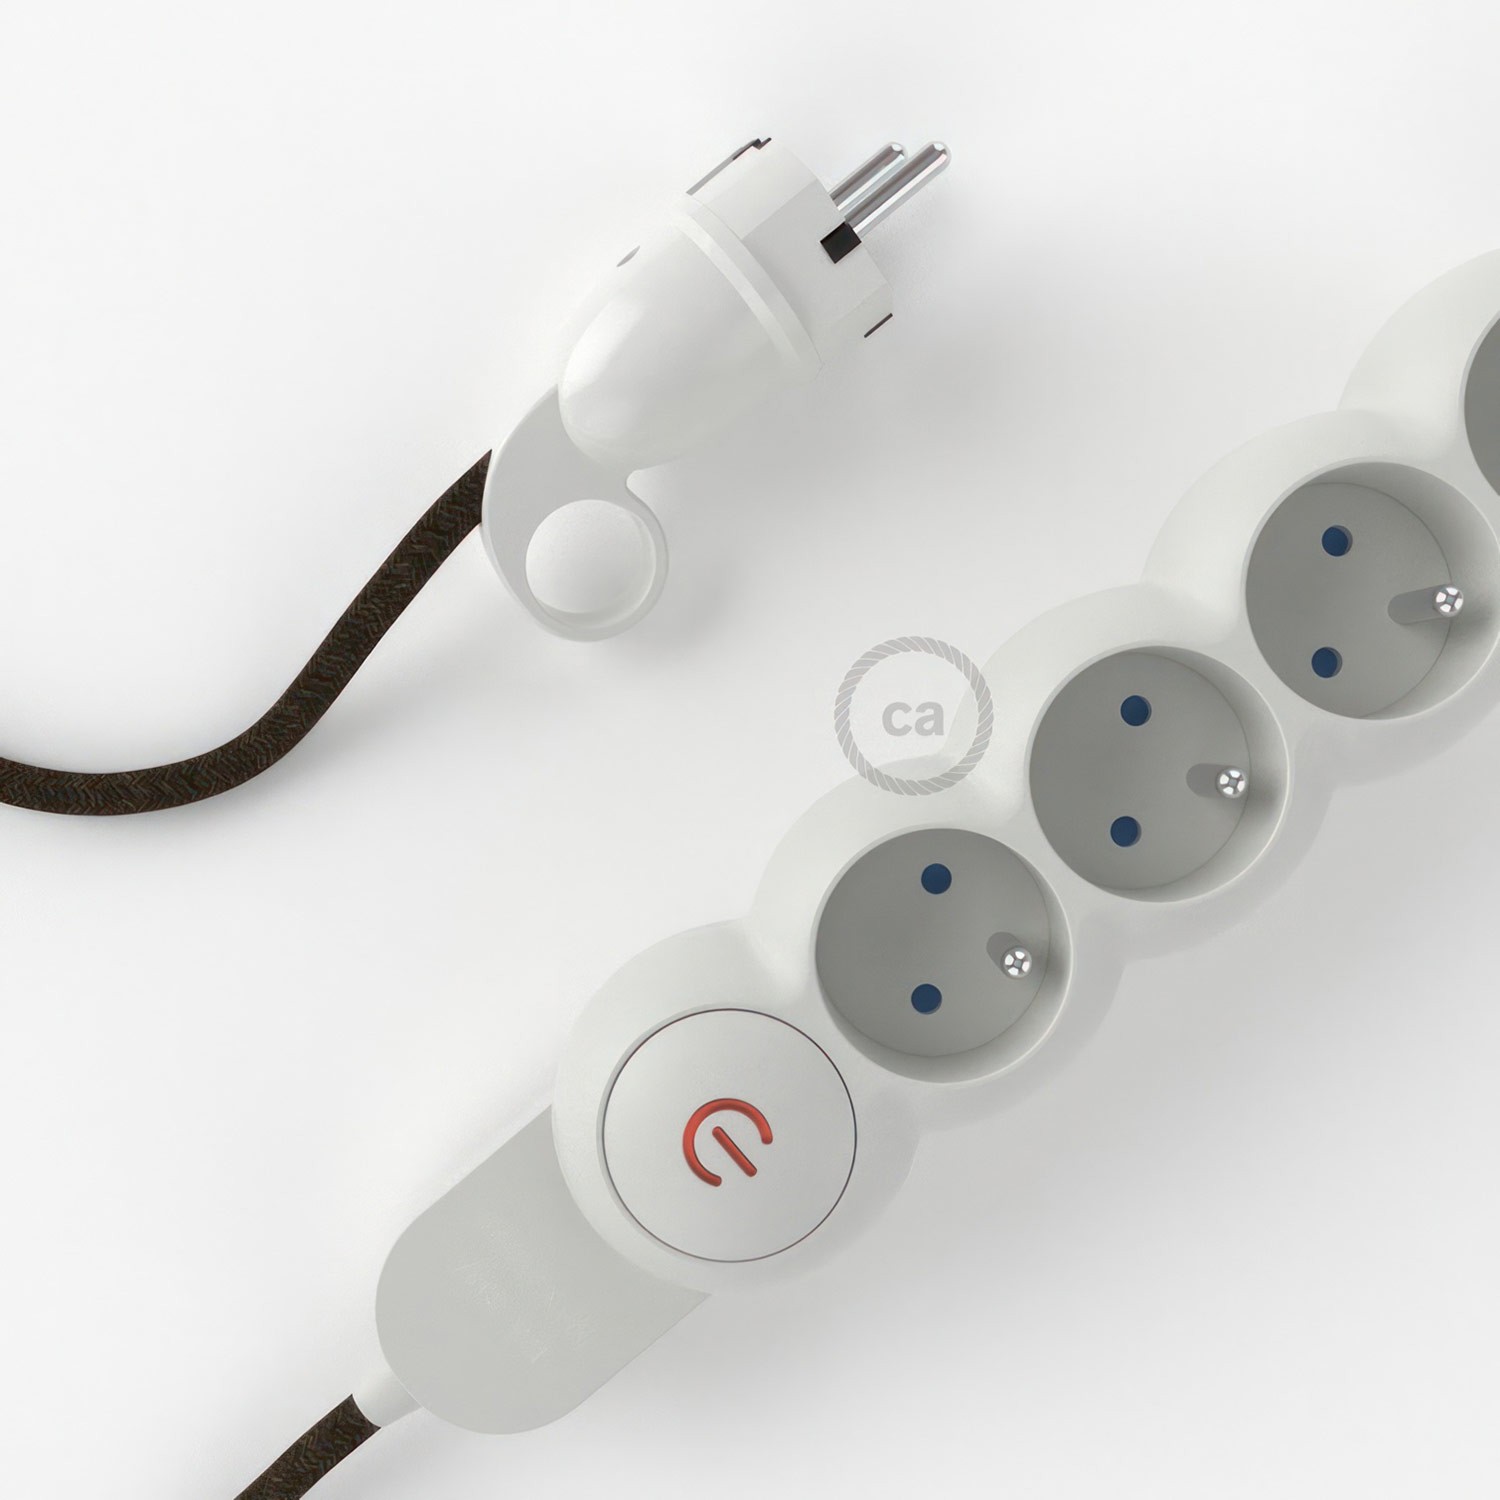 French Power Strip with electrical cable covered in Brown Natural Linen fabric RN04 and Schuko plug with confort ring